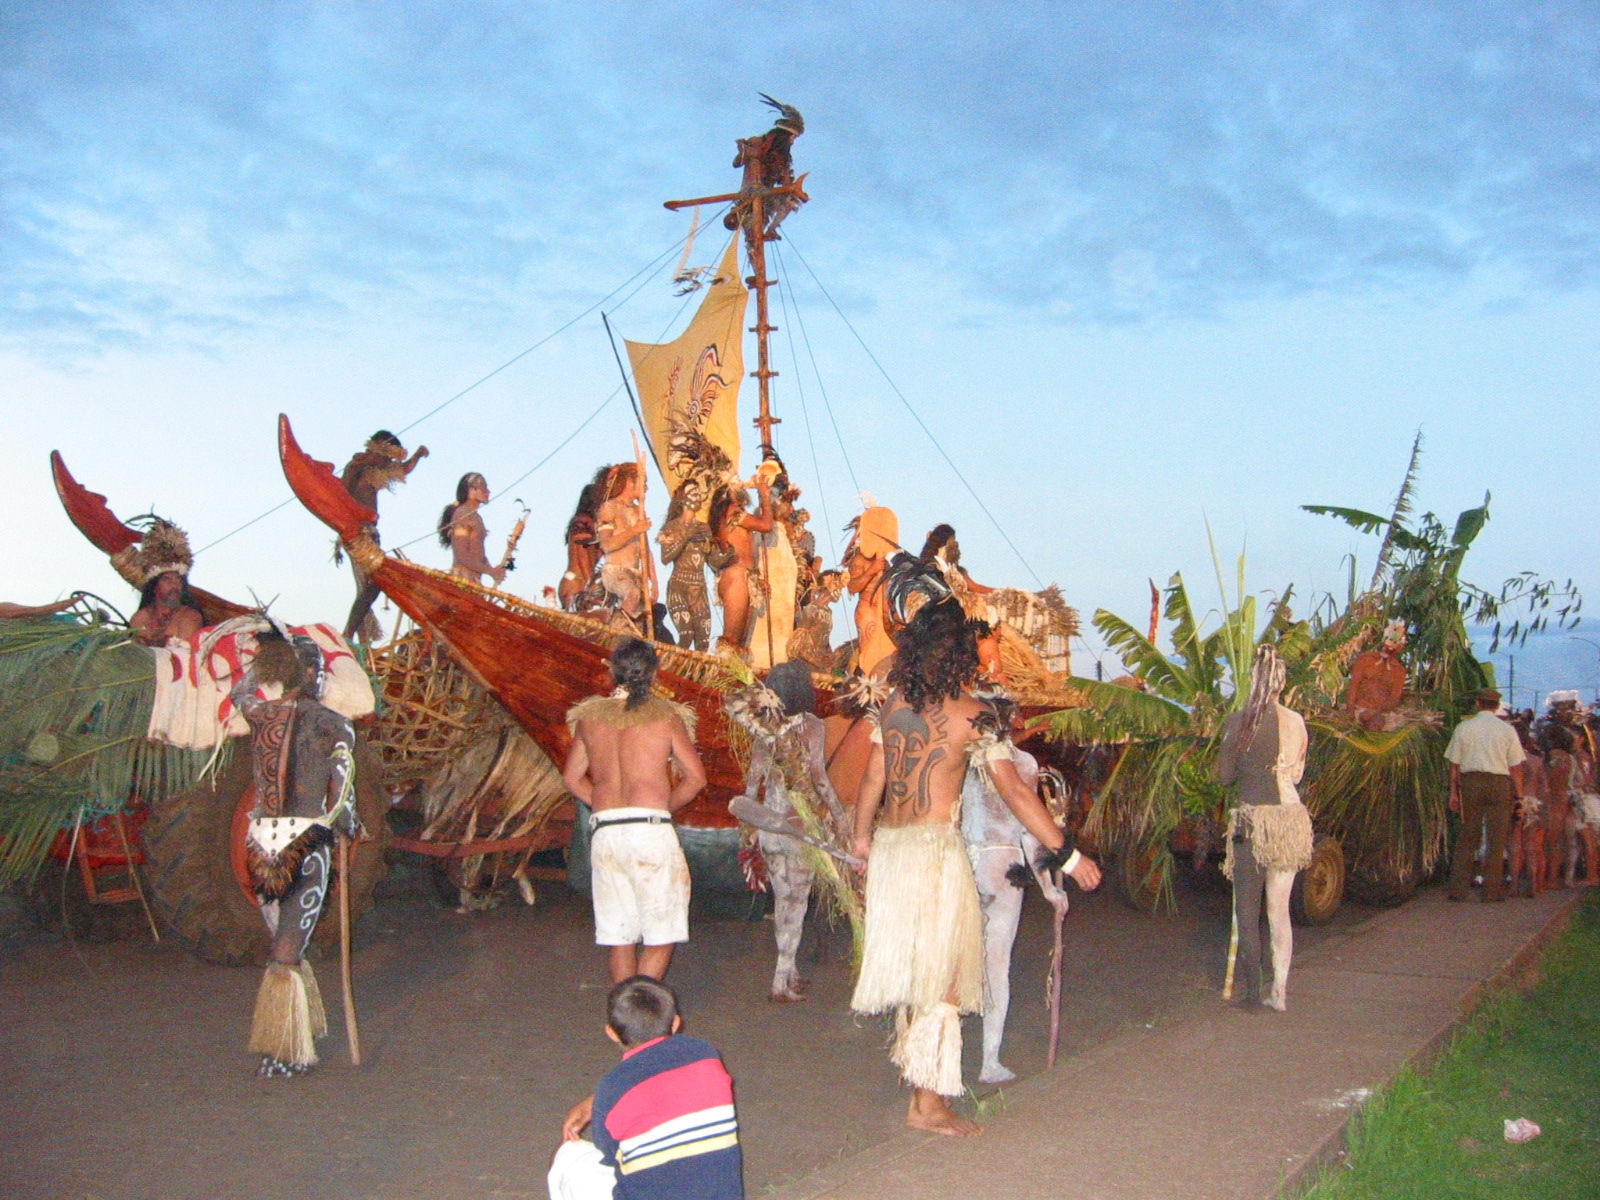 people dressed in native garb, and with no tops on